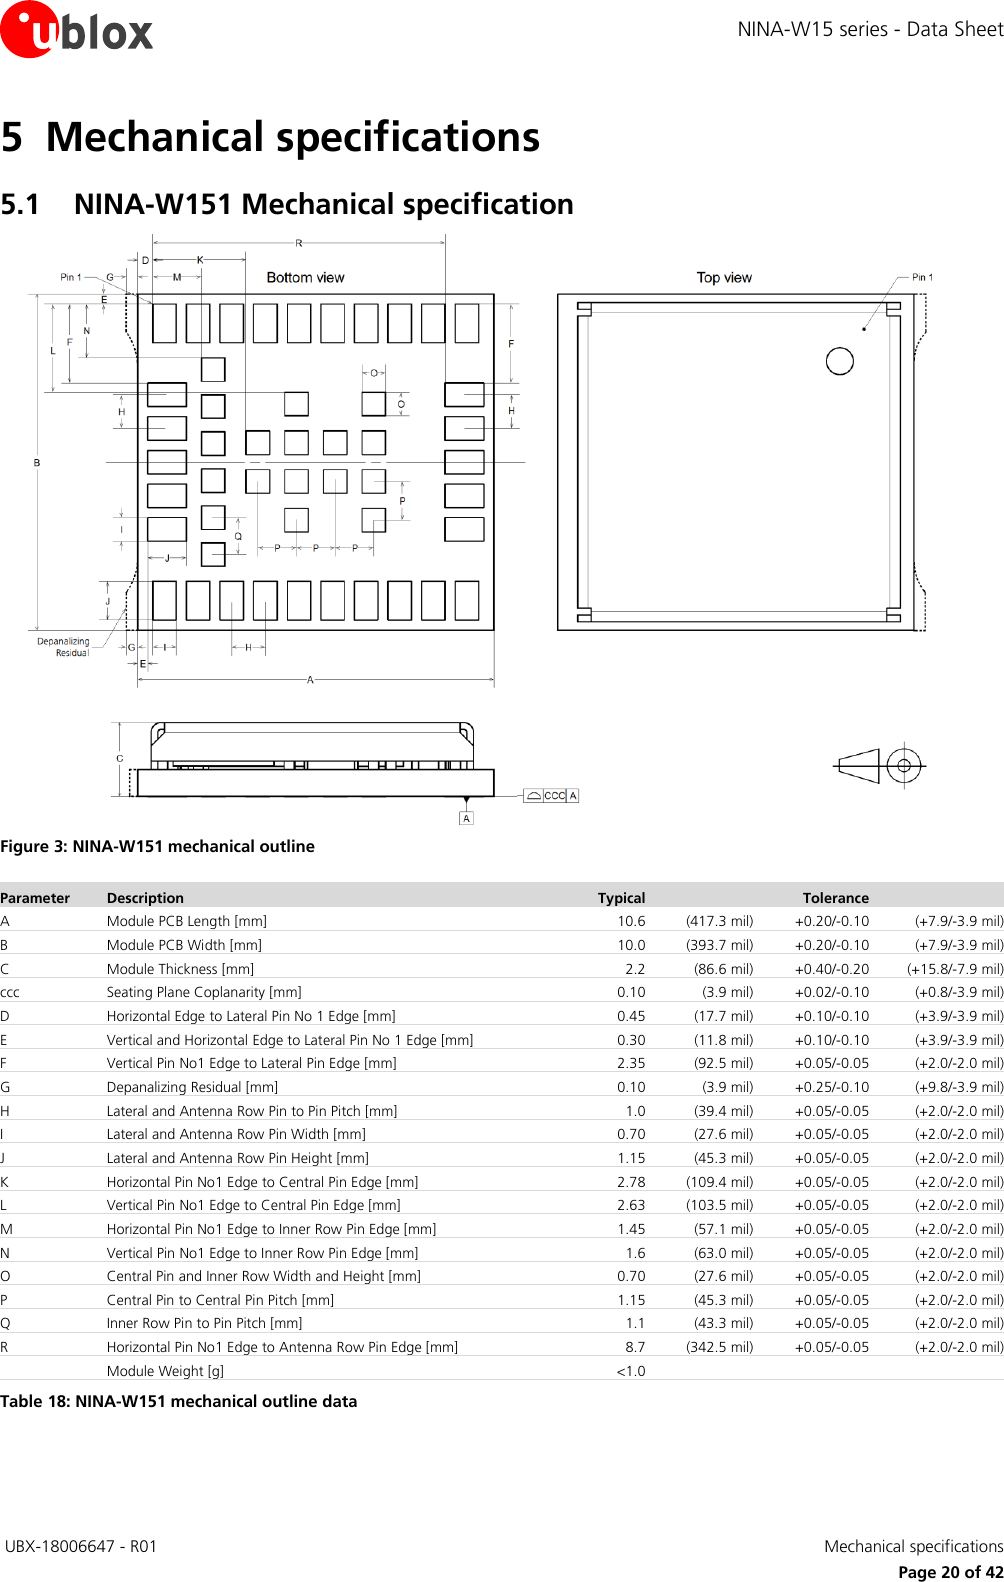 NINA-W15 series - Data Sheet  UBX-18006647 - R01   Mechanical specifications     Page 20 of 42 5 Mechanical specifications 5.1 NINA-W151 Mechanical specification  Figure 3: NINA-W151 mechanical outline Parameter Description Typical  Tolerance  A  Module PCB Length [mm] 10.6 (417.3 mil) +0.20/-0.10 (+7.9/-3.9 mil) B Module PCB Width [mm] 10.0 (393.7 mil) +0.20/-0.10 (+7.9/-3.9 mil) C Module Thickness [mm] 2.2 (86.6 mil) +0.40/-0.20 (+15.8/-7.9 mil) ccc Seating Plane Coplanarity [mm] 0.10 (3.9 mil) +0.02/-0.10 (+0.8/-3.9 mil) D Horizontal Edge to Lateral Pin No 1 Edge [mm] 0.45 (17.7 mil) +0.10/-0.10 (+3.9/-3.9 mil) E Vertical and Horizontal Edge to Lateral Pin No 1 Edge [mm] 0.30 (11.8 mil) +0.10/-0.10 (+3.9/-3.9 mil) F Vertical Pin No1 Edge to Lateral Pin Edge [mm] 2.35 (92.5 mil) +0.05/-0.05 (+2.0/-2.0 mil) G Depanalizing Residual [mm] 0.10 (3.9 mil) +0.25/-0.10 (+9.8/-3.9 mil) H Lateral and Antenna Row Pin to Pin Pitch [mm] 1.0 (39.4 mil) +0.05/-0.05 (+2.0/-2.0 mil) I Lateral and Antenna Row Pin Width [mm] 0.70 (27.6 mil) +0.05/-0.05 (+2.0/-2.0 mil) J Lateral and Antenna Row Pin Height [mm] 1.15 (45.3 mil) +0.05/-0.05 (+2.0/-2.0 mil) K Horizontal Pin No1 Edge to Central Pin Edge [mm] 2.78 (109.4 mil) +0.05/-0.05 (+2.0/-2.0 mil) L Vertical Pin No1 Edge to Central Pin Edge [mm] 2.63 (103.5 mil) +0.05/-0.05 (+2.0/-2.0 mil) M Horizontal Pin No1 Edge to Inner Row Pin Edge [mm] 1.45 (57.1 mil) +0.05/-0.05 (+2.0/-2.0 mil) N Vertical Pin No1 Edge to Inner Row Pin Edge [mm] 1.6 (63.0 mil) +0.05/-0.05 (+2.0/-2.0 mil) O Central Pin and Inner Row Width and Height [mm] 0.70 (27.6 mil) +0.05/-0.05 (+2.0/-2.0 mil) P Central Pin to Central Pin Pitch [mm] 1.15 (45.3 mil) +0.05/-0.05 (+2.0/-2.0 mil) Q Inner Row Pin to Pin Pitch [mm] 1.1 (43.3 mil) +0.05/-0.05 (+2.0/-2.0 mil) R Horizontal Pin No1 Edge to Antenna Row Pin Edge [mm] 8.7 (342.5 mil) +0.05/-0.05 (+2.0/-2.0 mil)  Module Weight [g] &lt;1.0    Table 18: NINA-W151 mechanical outline data 